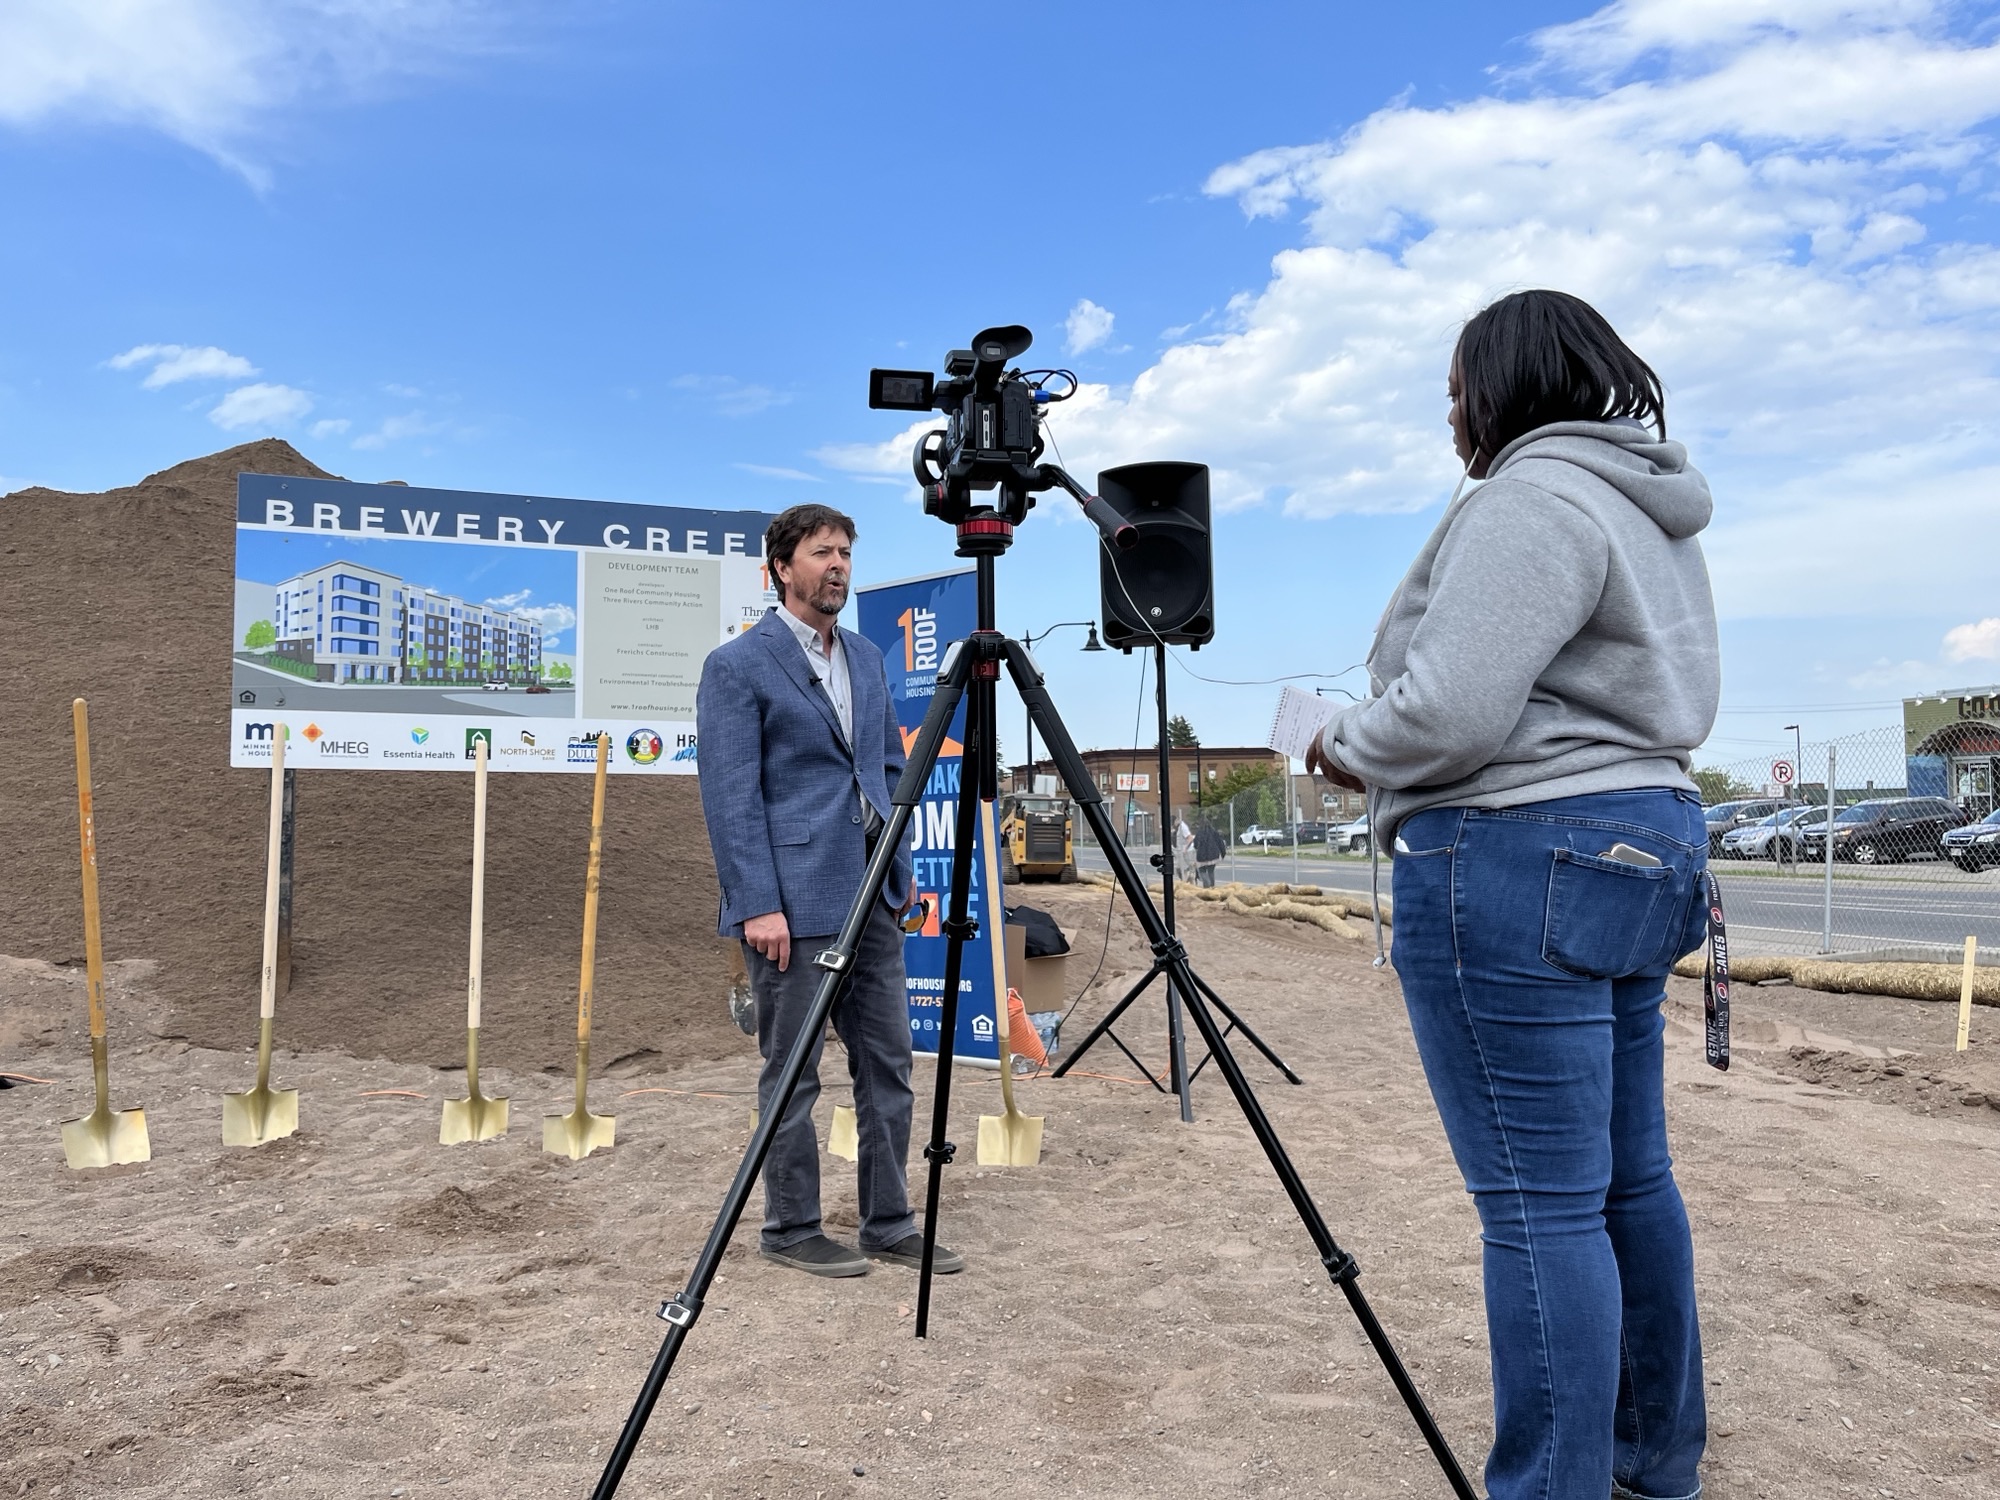 Jeff Corey speaks to media at the groundbreaking for the new Brewery Creek Apartments, which will provide 52 units of mixed-income housing in Duluth's Hillside neighborhood. Photo credit: One Roof Community Housing